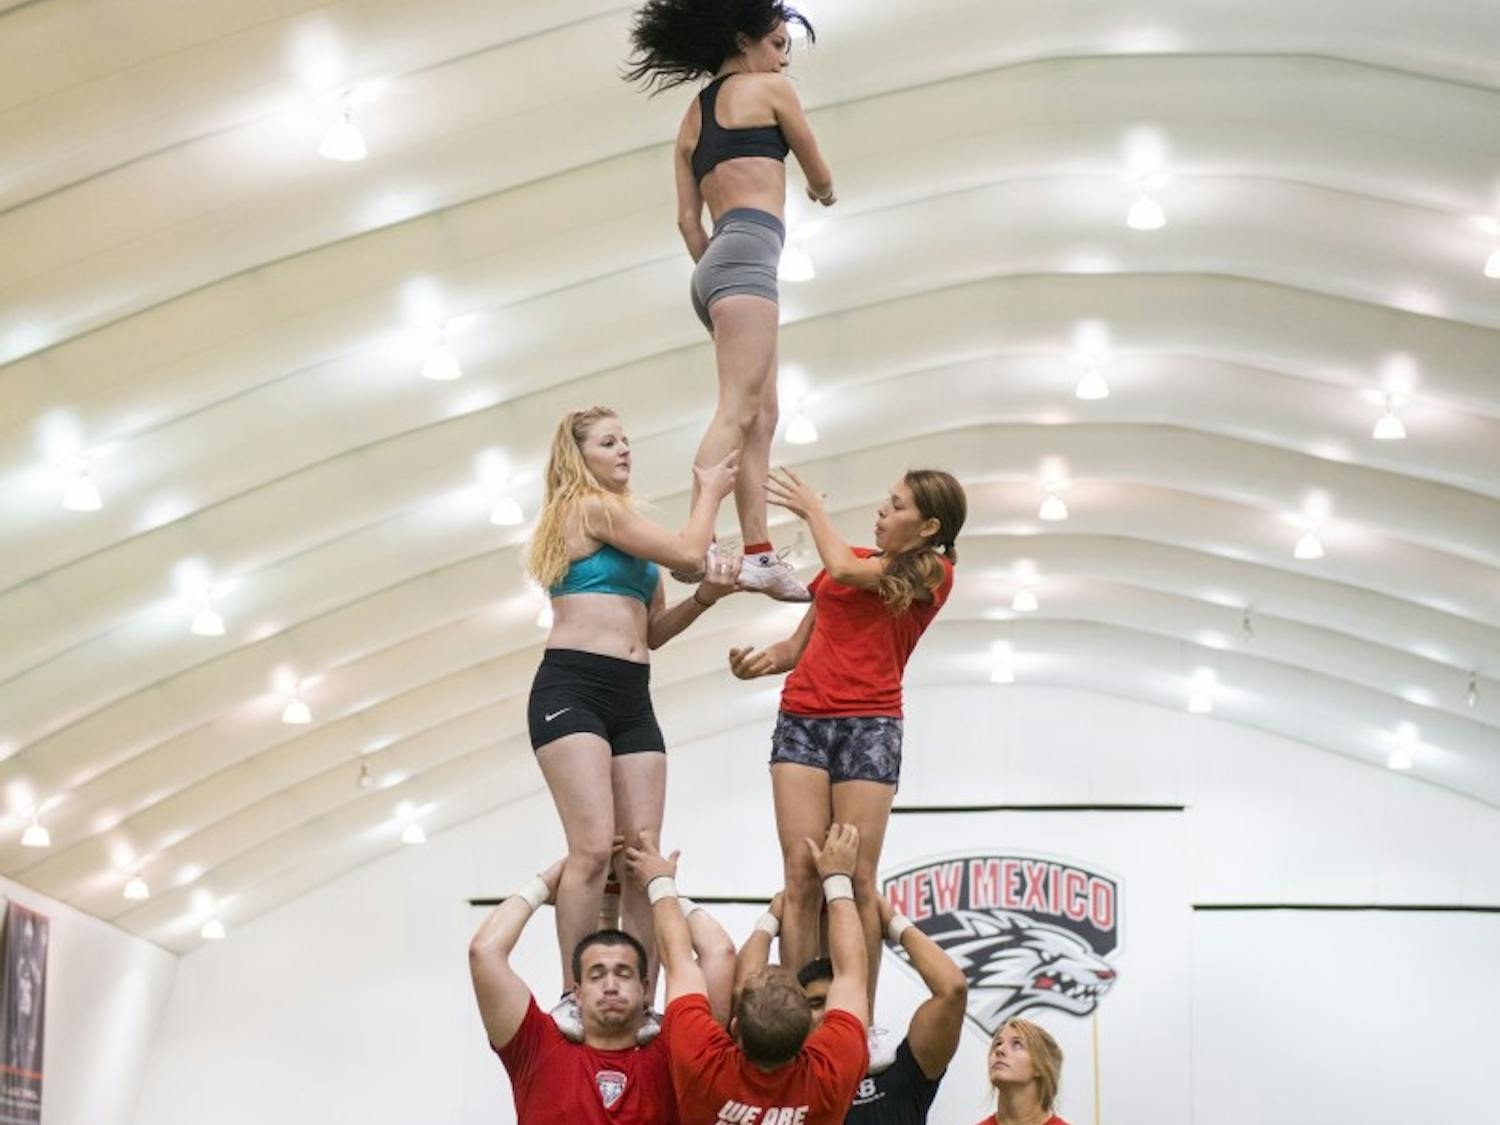 The New Mexico spirit squad practices drills at the Football Indoor Practice Facility Aug. 9, 2015.